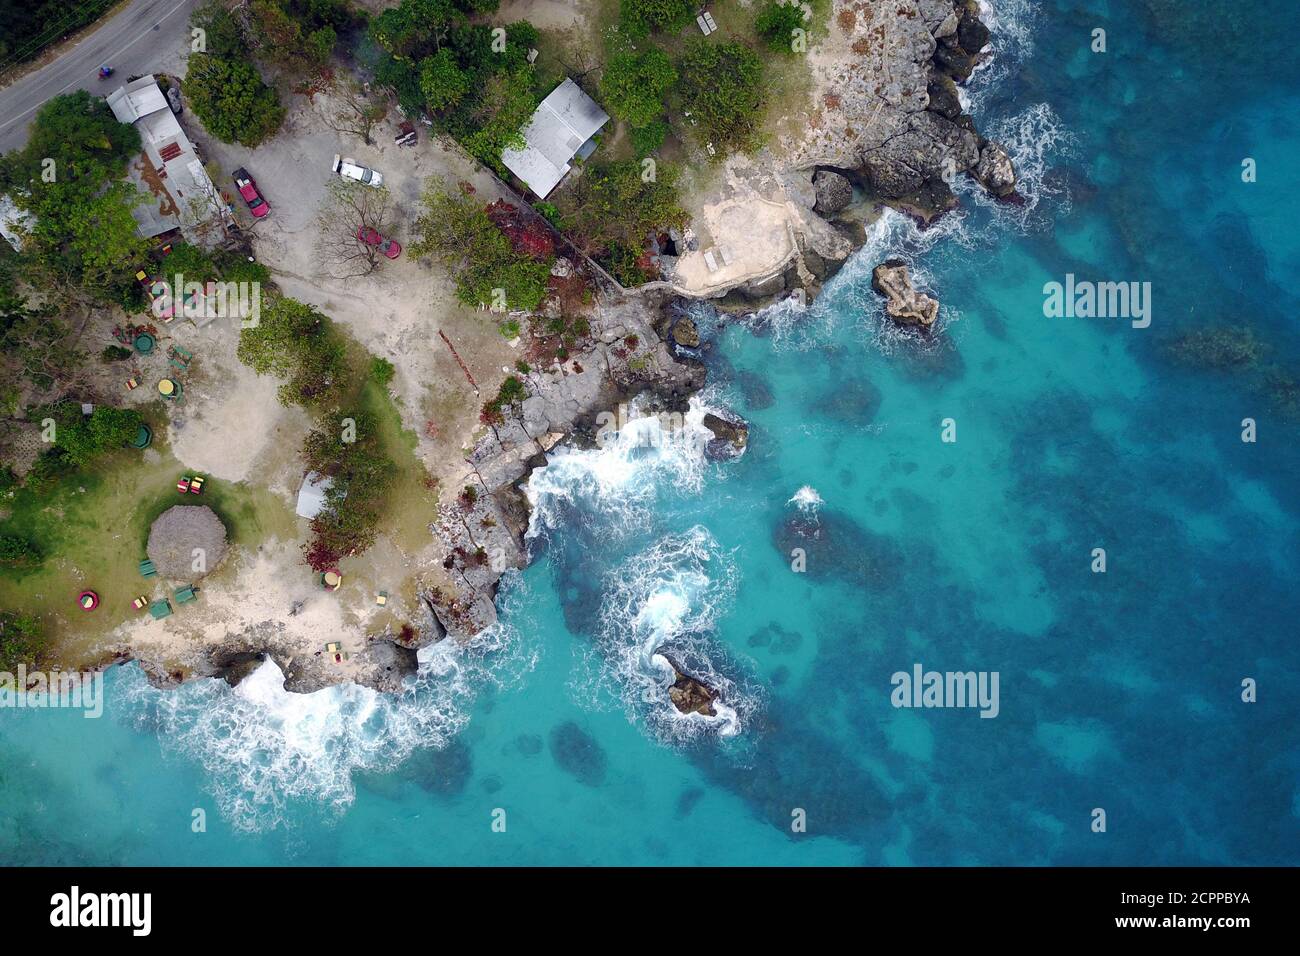 Drone aerial image of 3 Dives Point on the western coast of Jamaica near Negril. Stock Photo